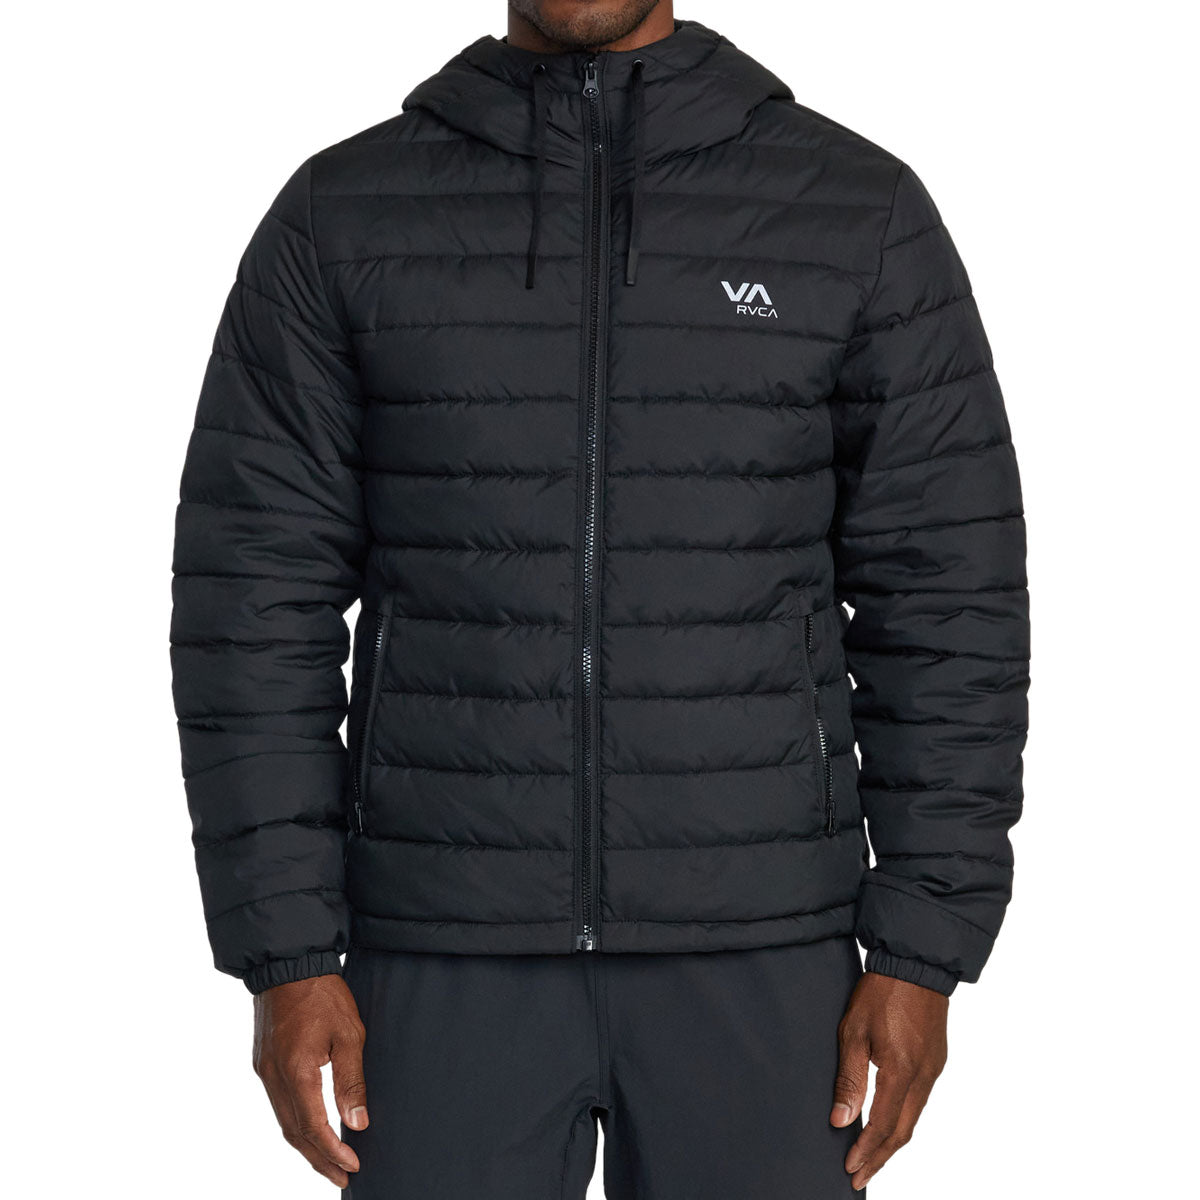 RVCA Packable Puffa Hooded Jacket - Black image 1